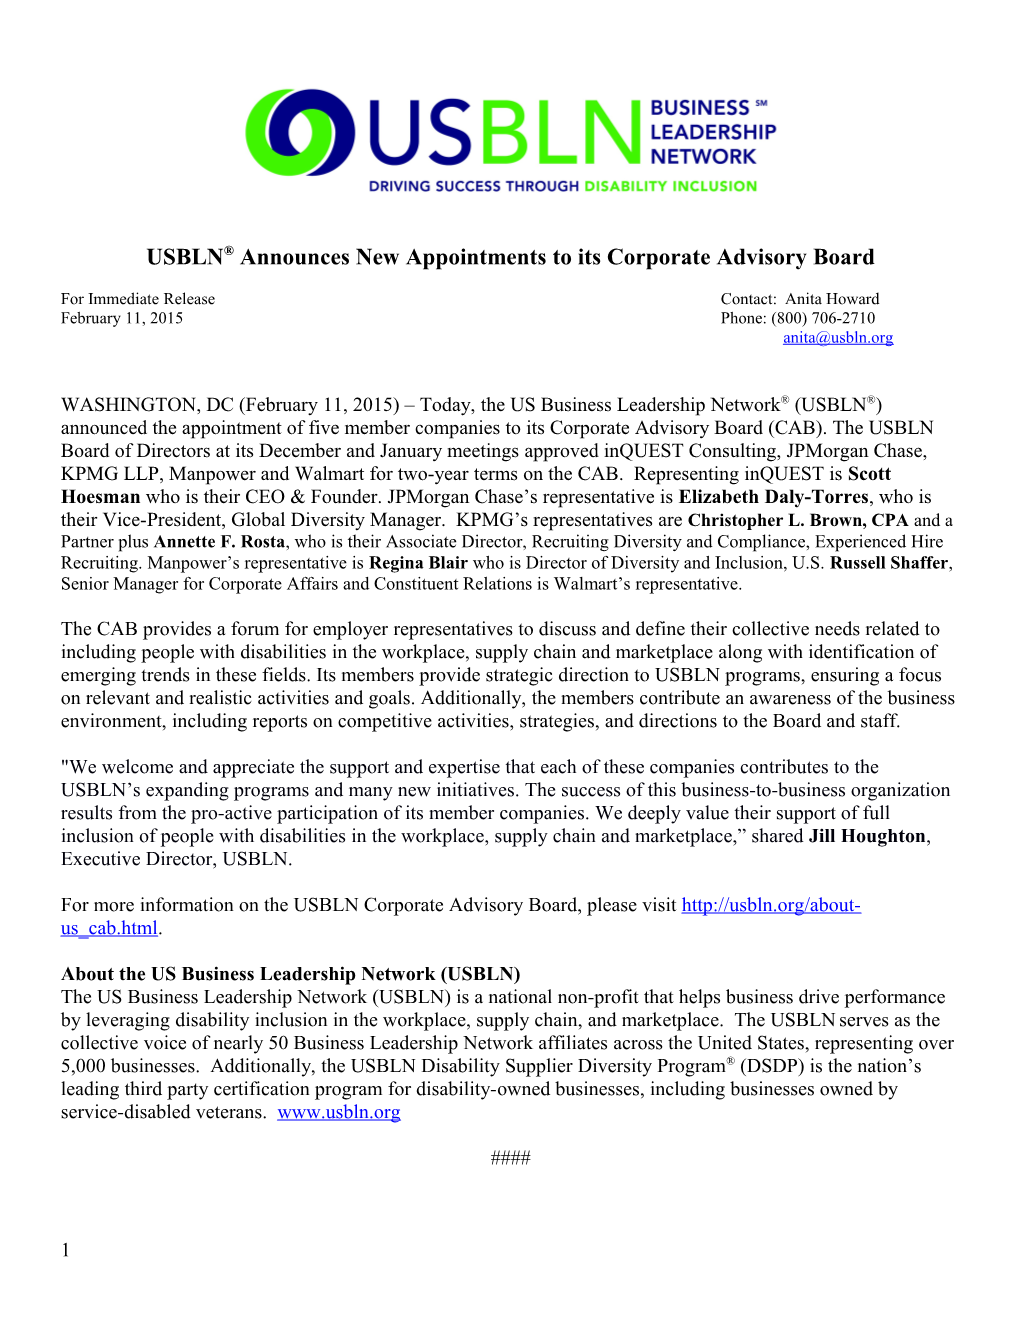 USBLN Announces New Appointments to Its Corporate Advisory Board